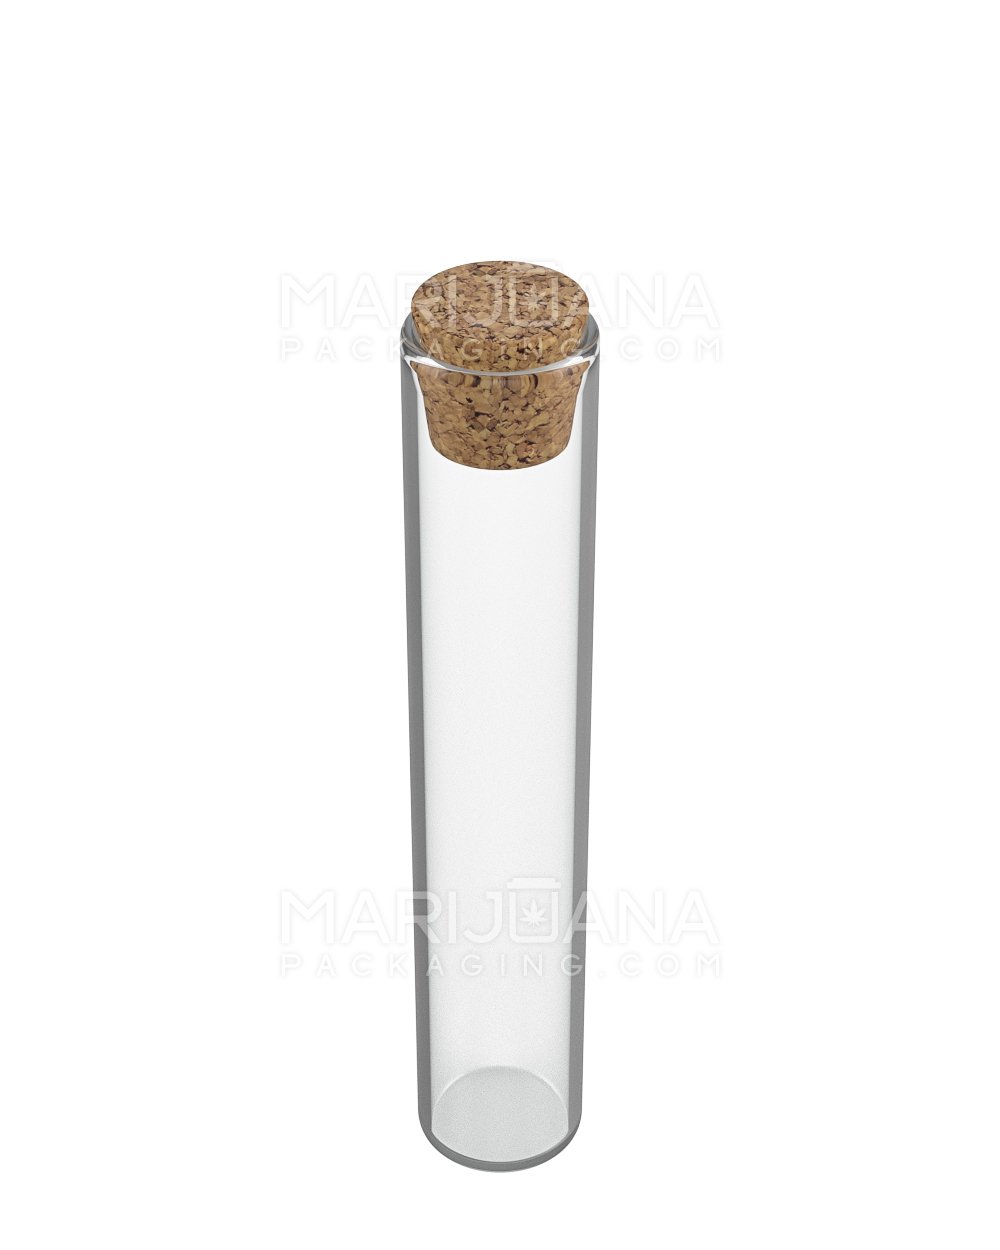 Glass Pre-Roll Tube with Cork Top | 120mm - Clear Glass - 570 Count - 5